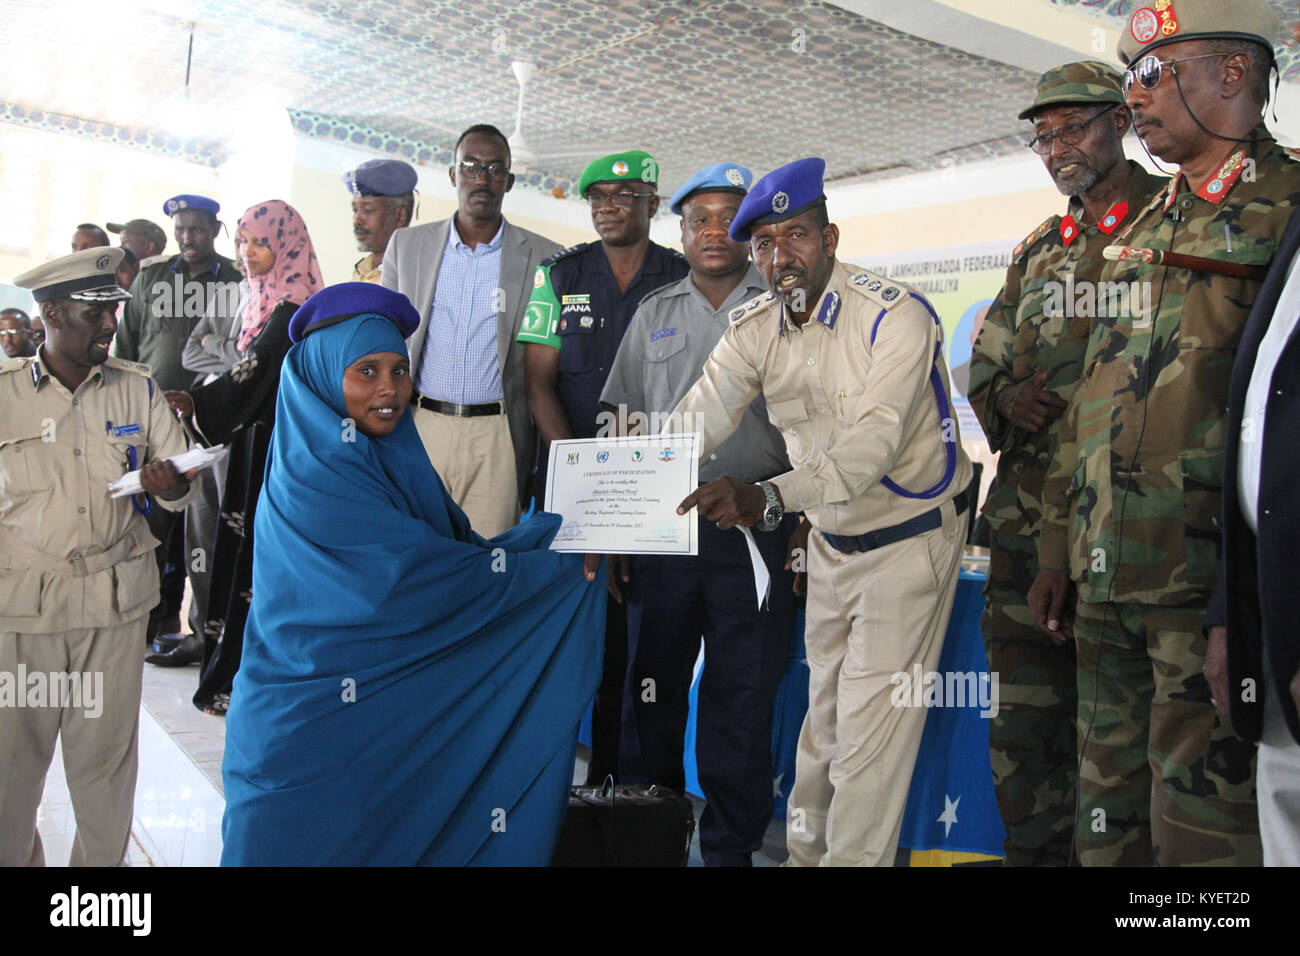 General Said Dheere, Puntland Police Commissioner   hands over a certificate to a female police officer at the end of a Joint Police Patrol Training conducted by AMISOM and UN officers in Gaalkacyo, Somalia on December 19, 2017. AMISOM Photo Stock Photo